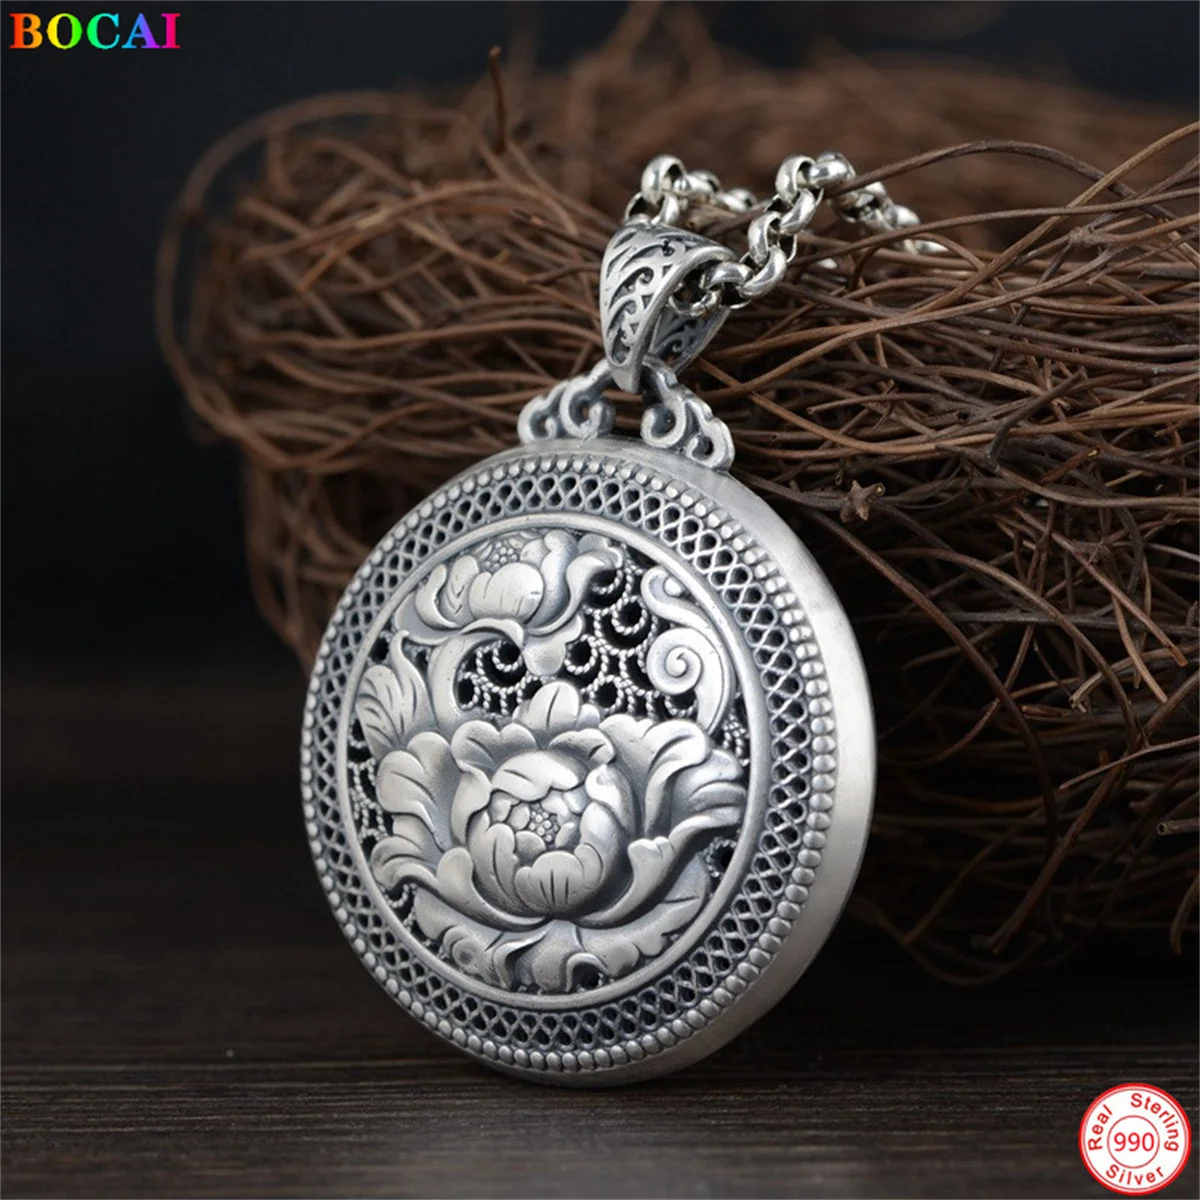 s990-sterling-silver-charm-pendant-huagaifugui-peony-hollow-out-hanging-ornament-pure-argentum-jewelry-gift-for-women-valentine